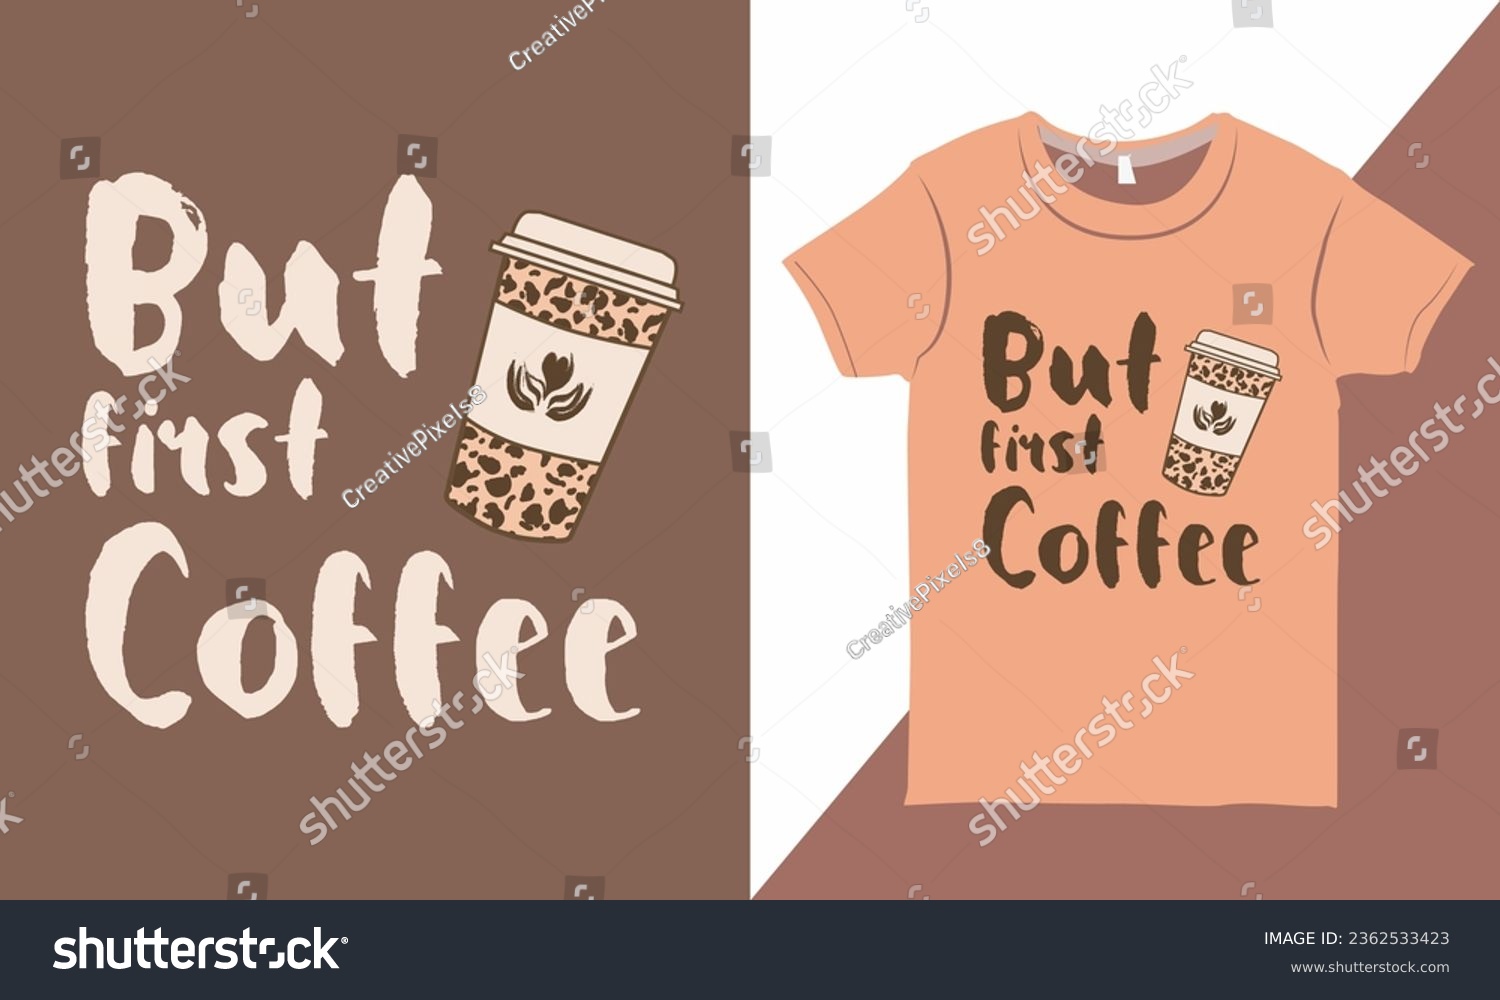 SVG of But First Coffee Quotes Shirt Design Template, T-shirt with Coffee Cup Vector svg